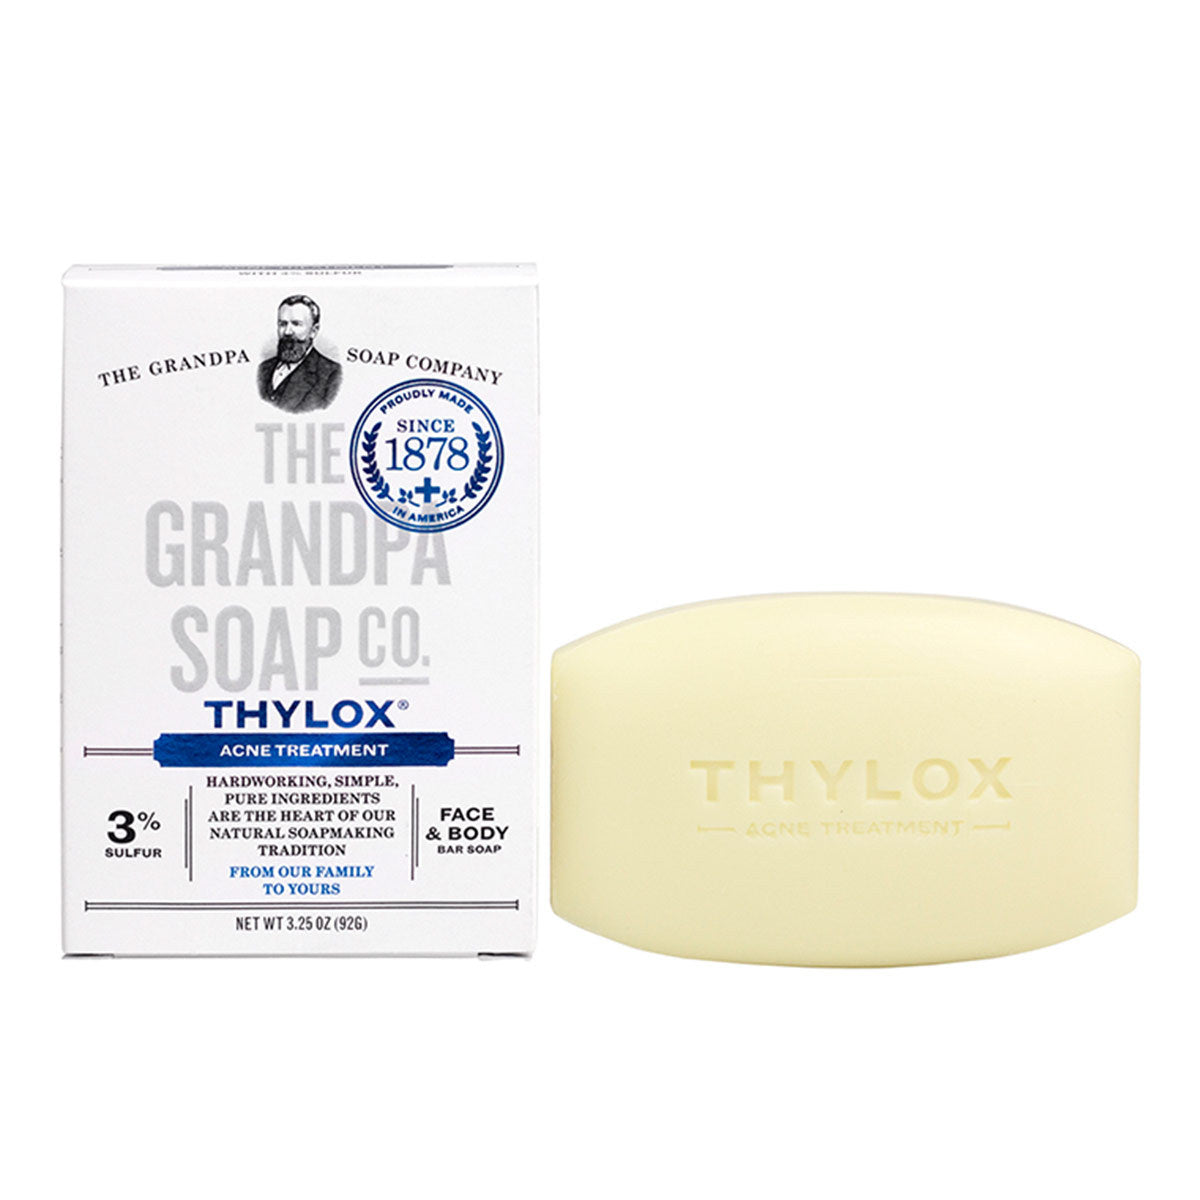 Primary image of Thylox Soap